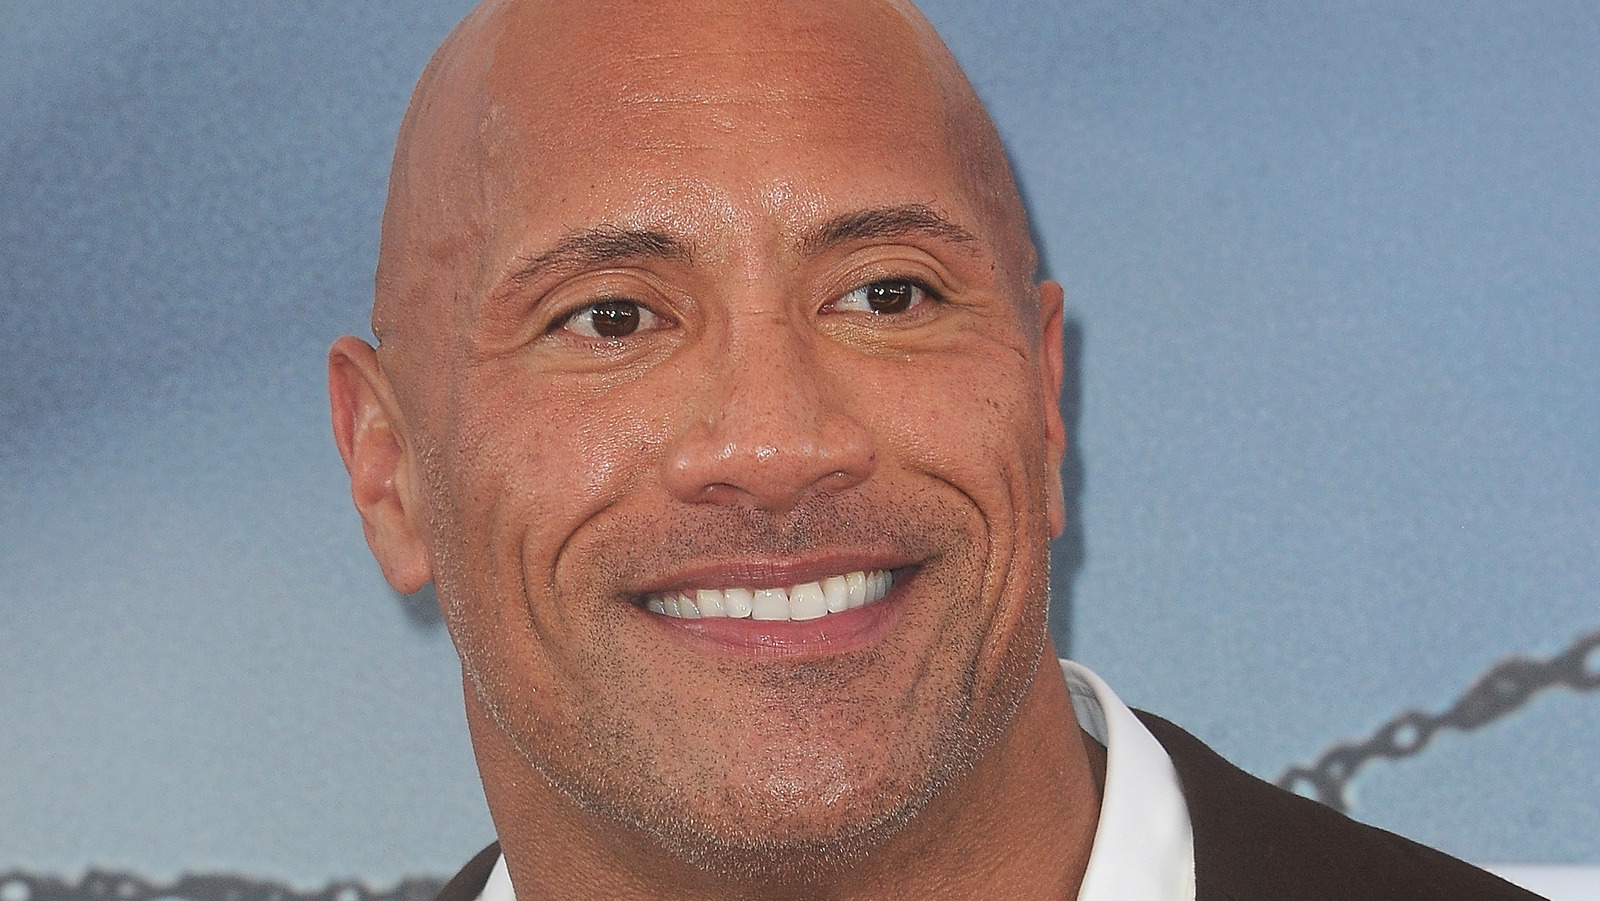 The Rock Has Officially Started Training for DC's Black Adam